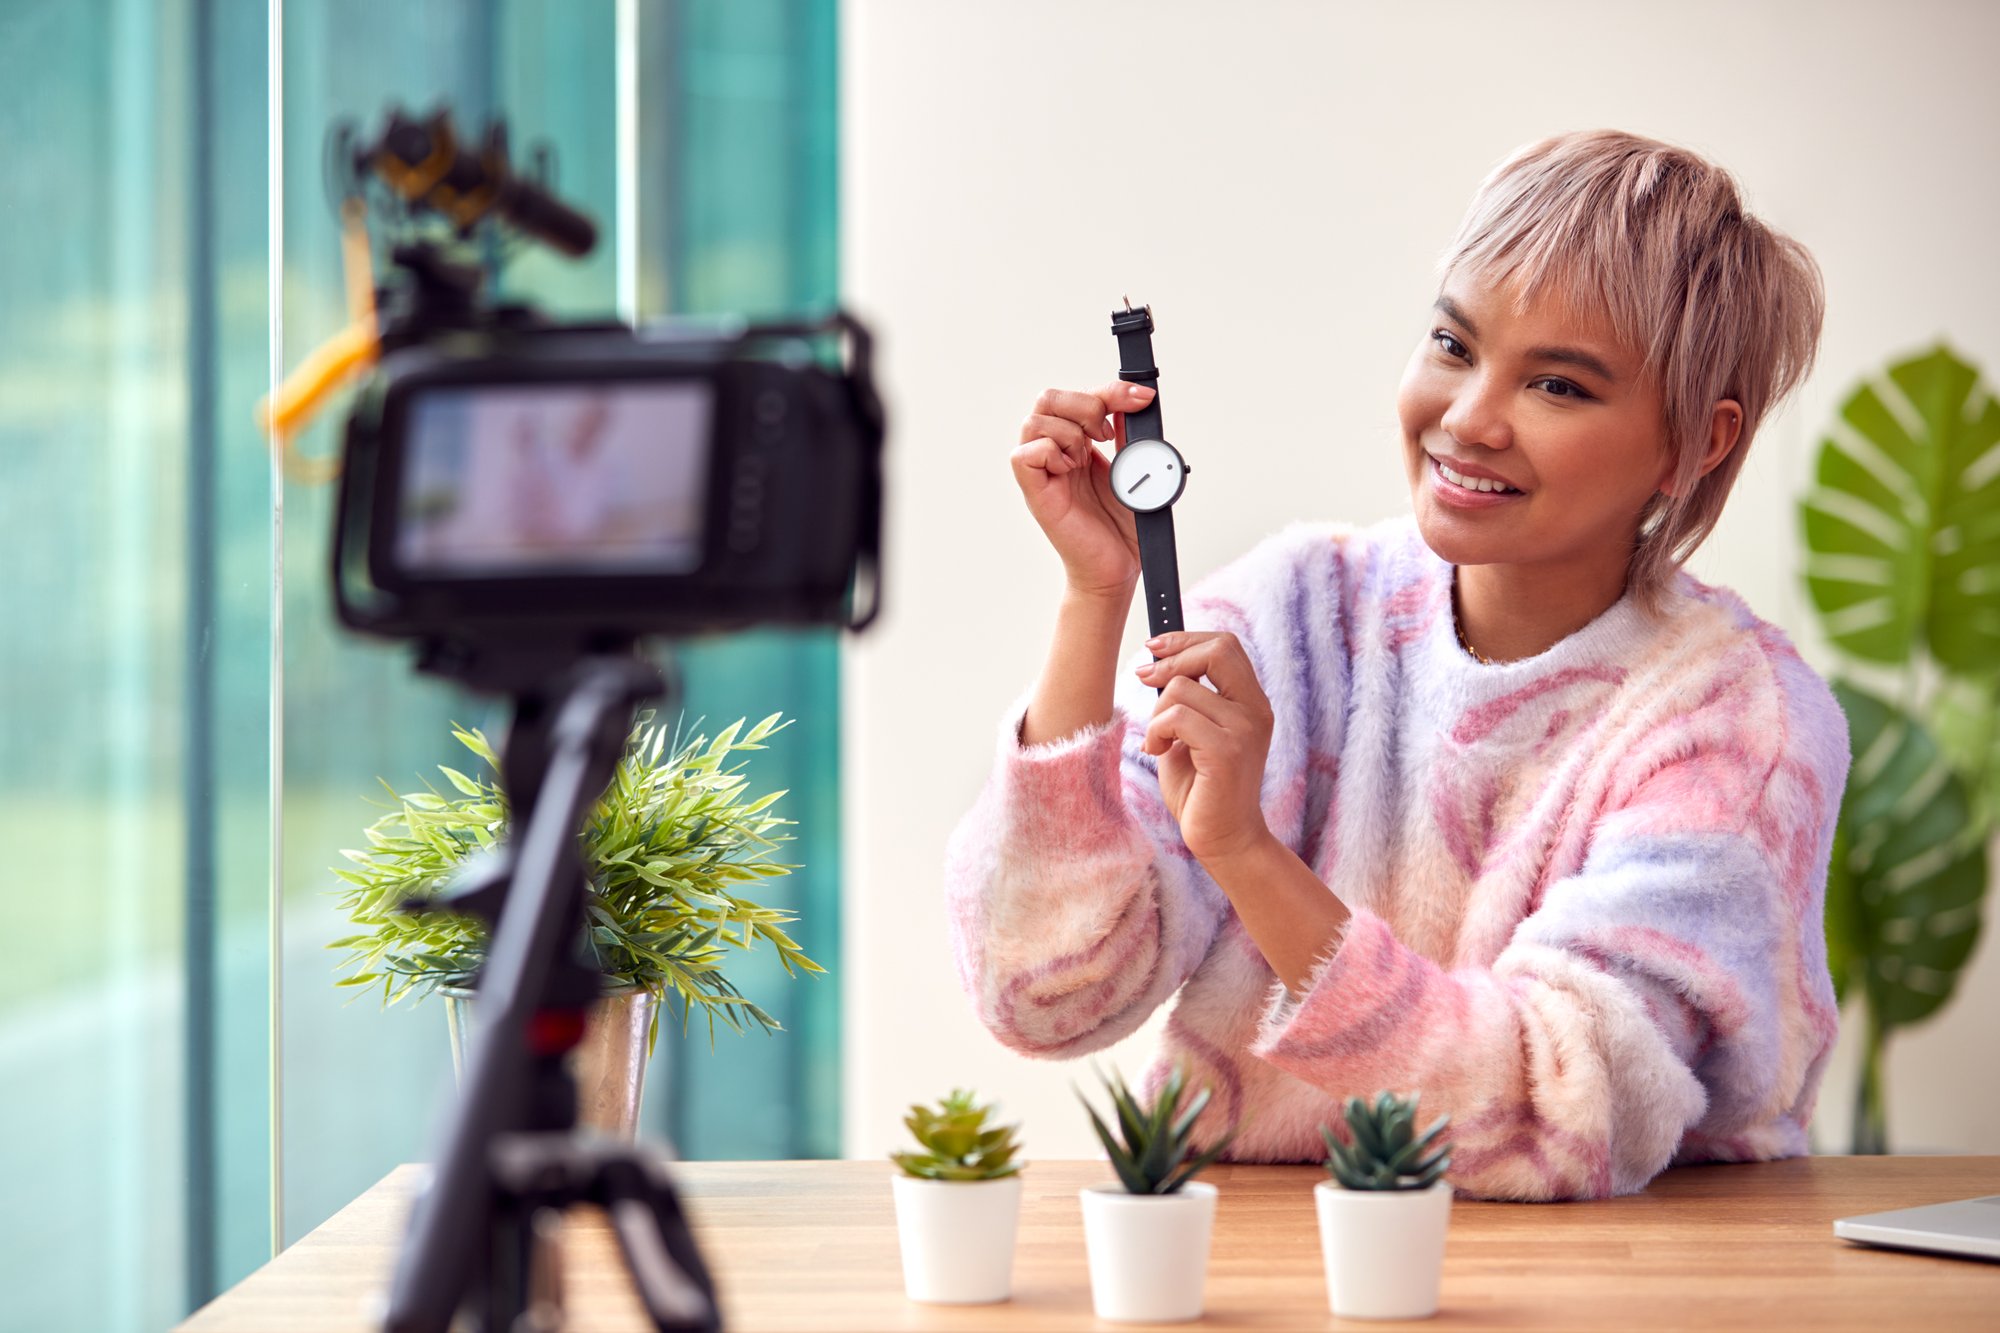 female-vlogger-recording-wristwatch-product-review-2022-11-10-18-02-02-utc